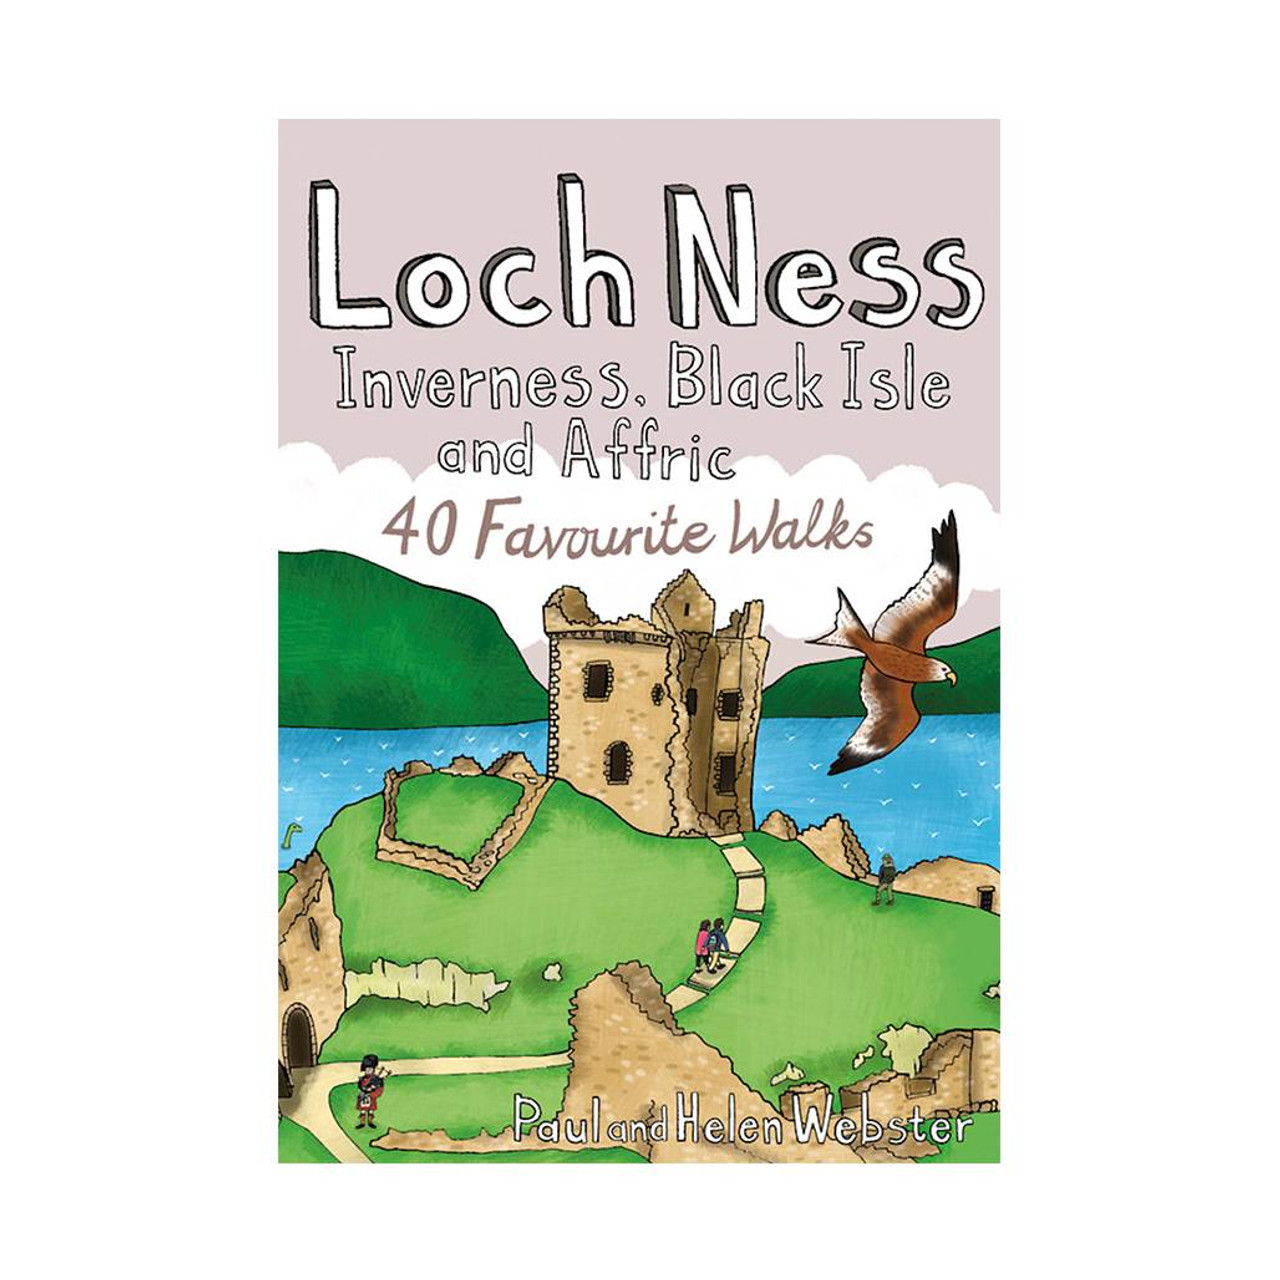 Loch Ness  Inverness  Black Isle And Affric: 40 Favourite Walks